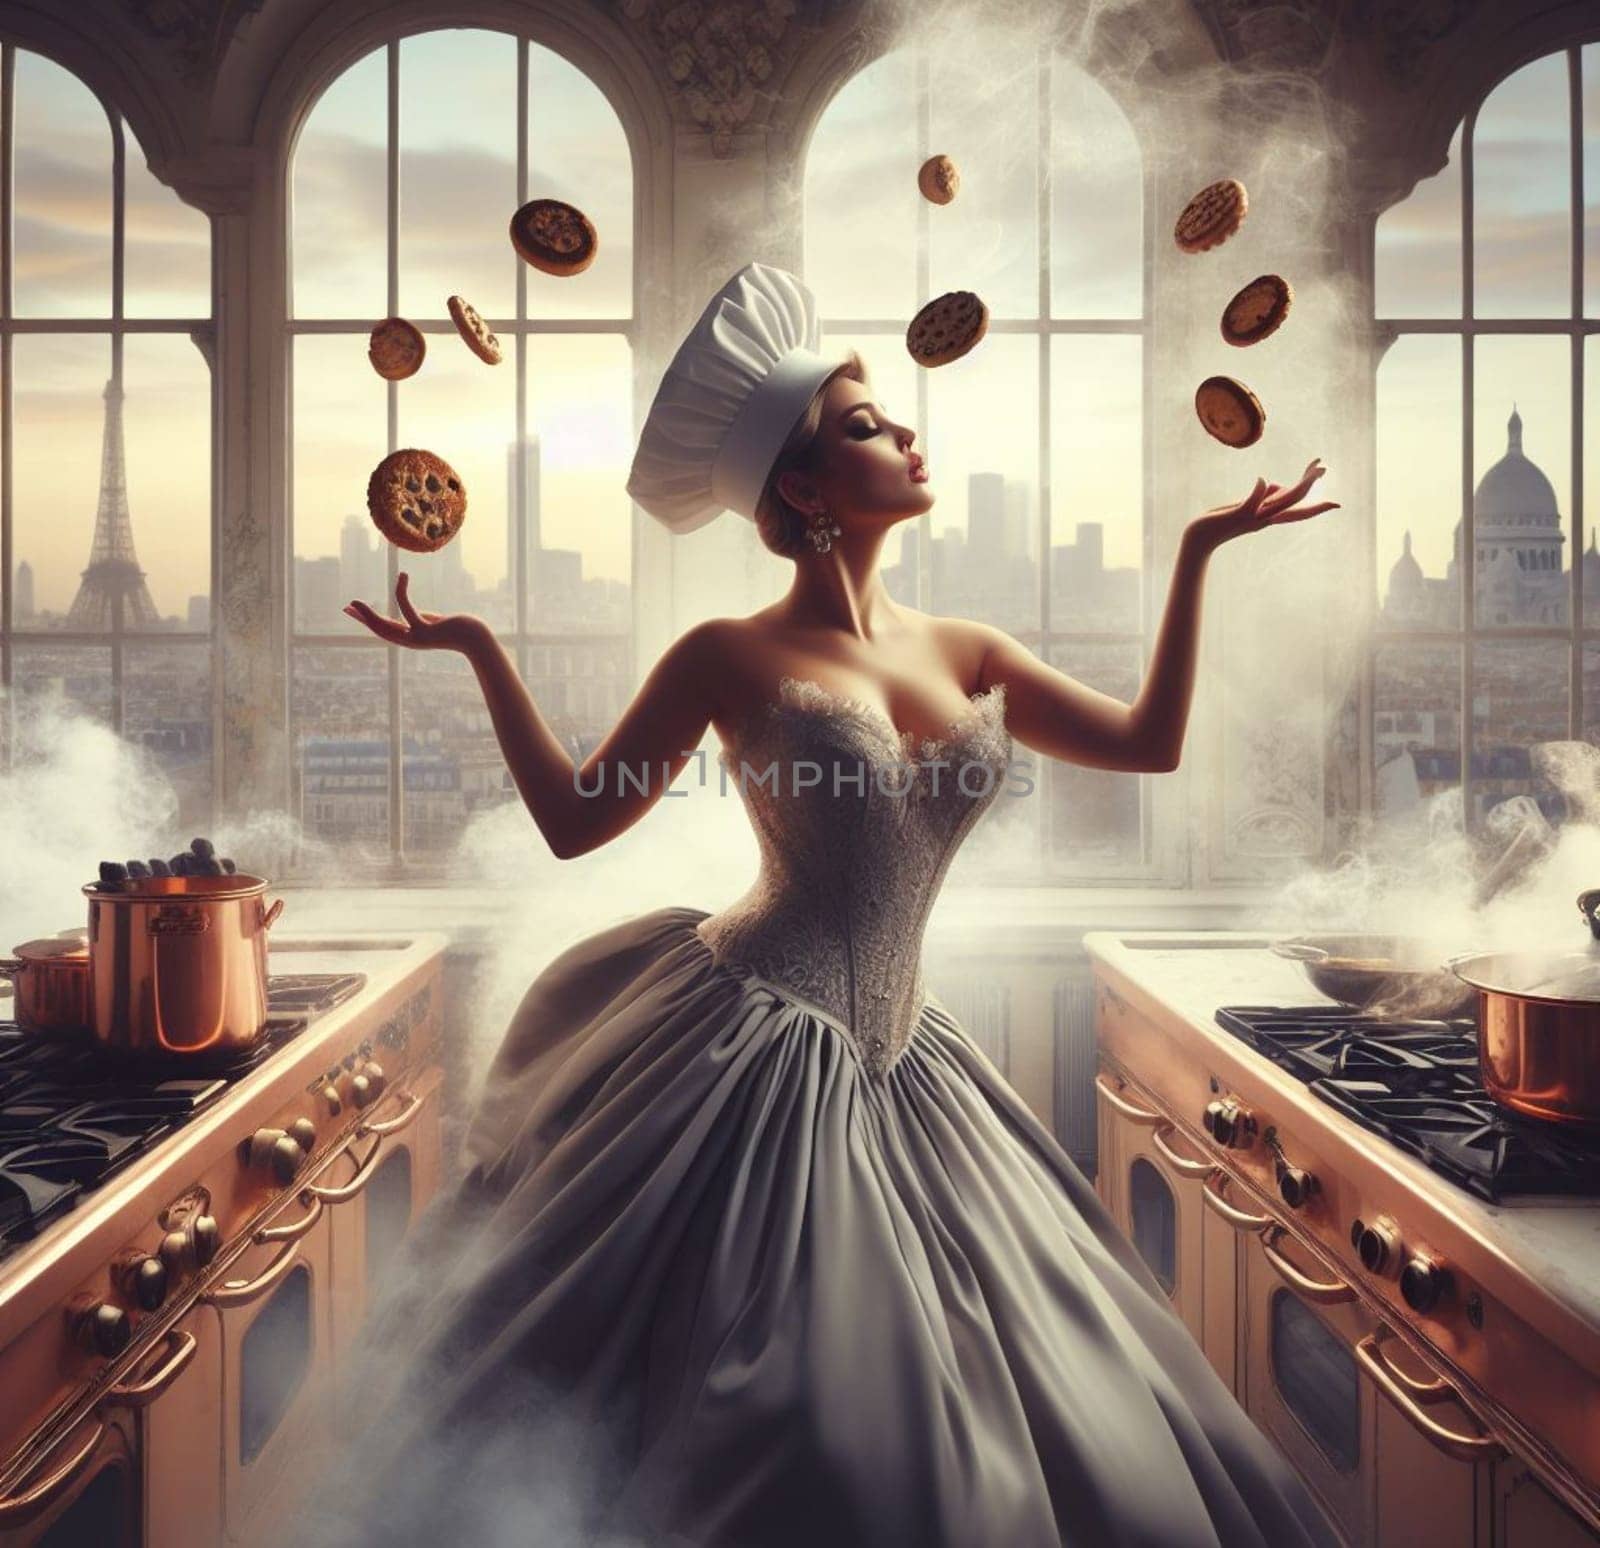 glamourous chef in steampunk kitchen with windiwn natural light cooking posing dancing singing illustration by verbano